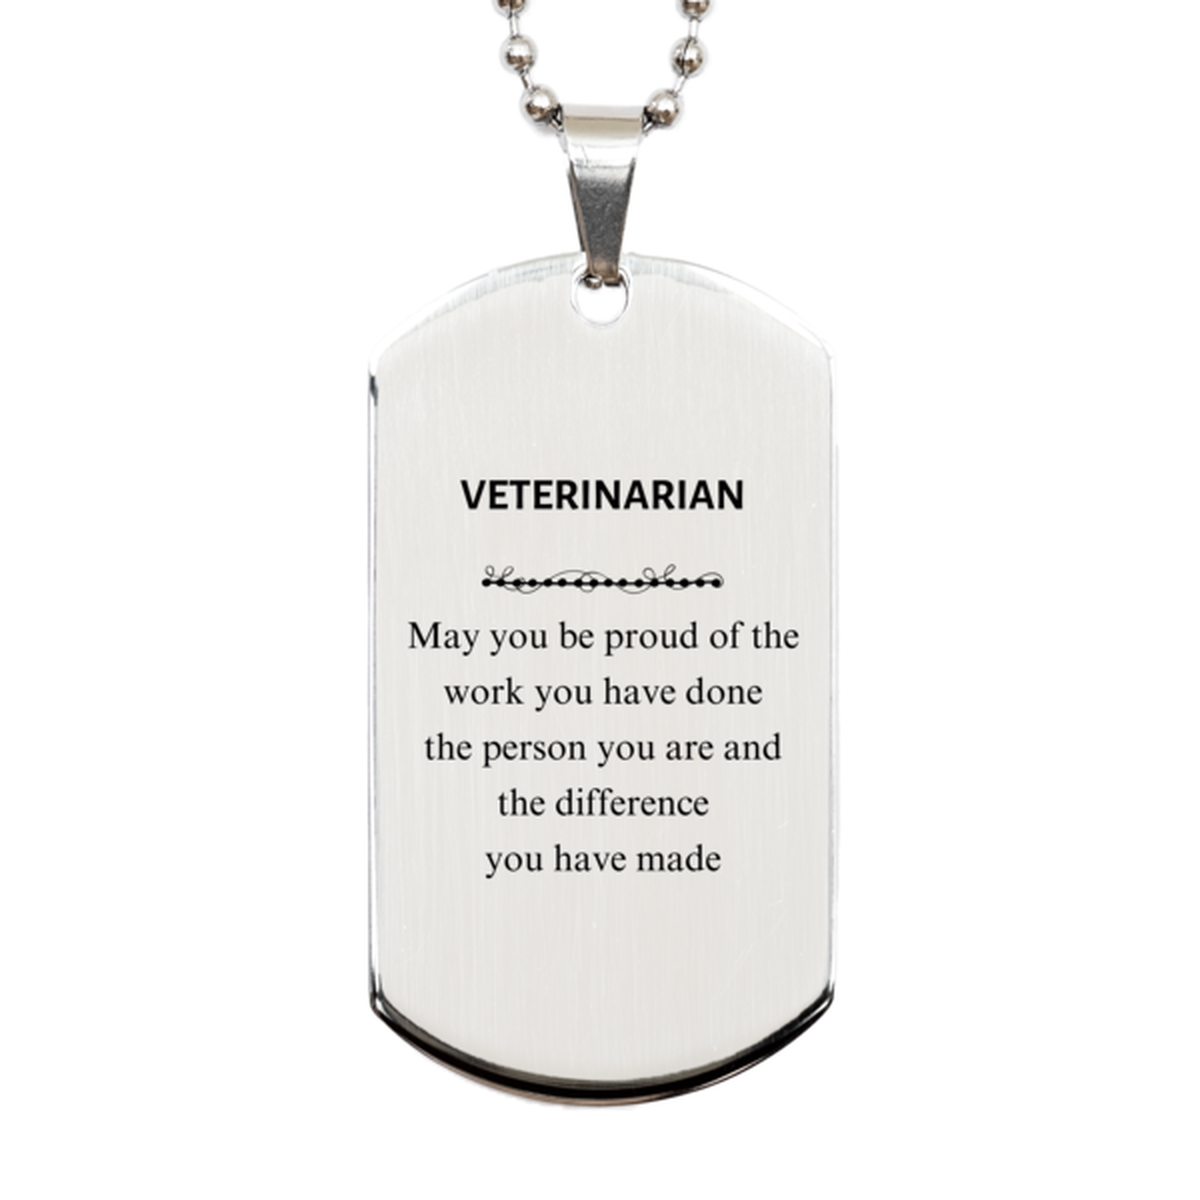 Veterinarian May you be proud of the work you have done, Retirement Veterinarian Silver Dog Tag for Colleague Appreciation Gifts Amazing for Veterinarian